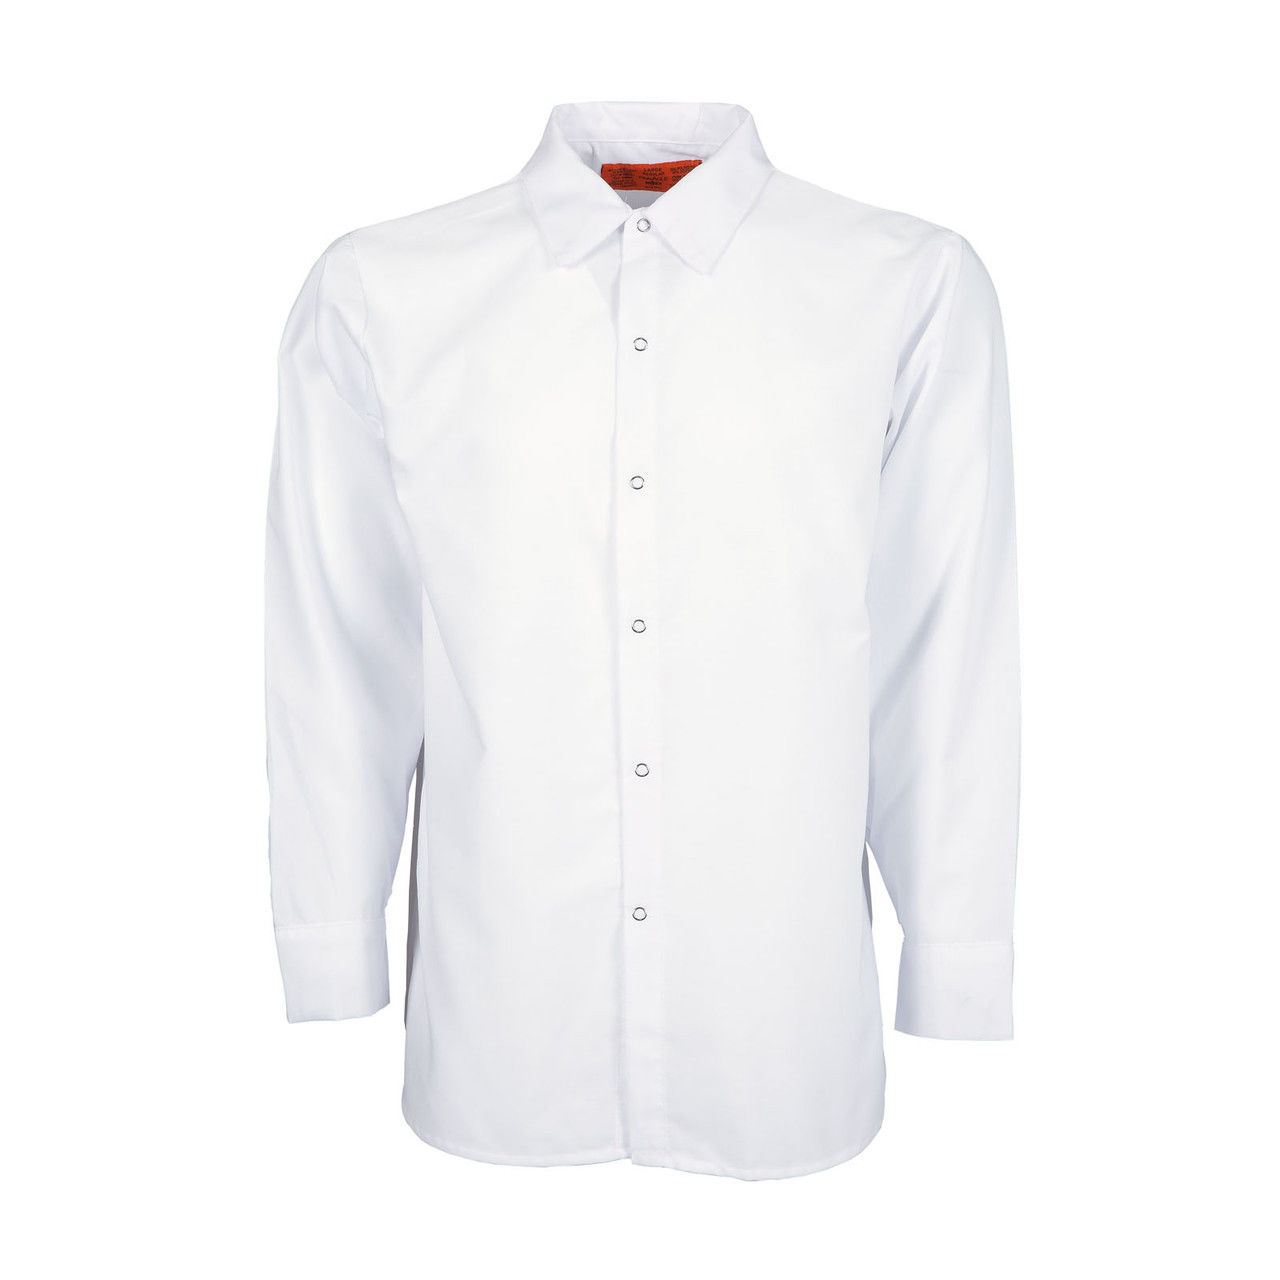 Does the white work shirts mens style have any pockets?